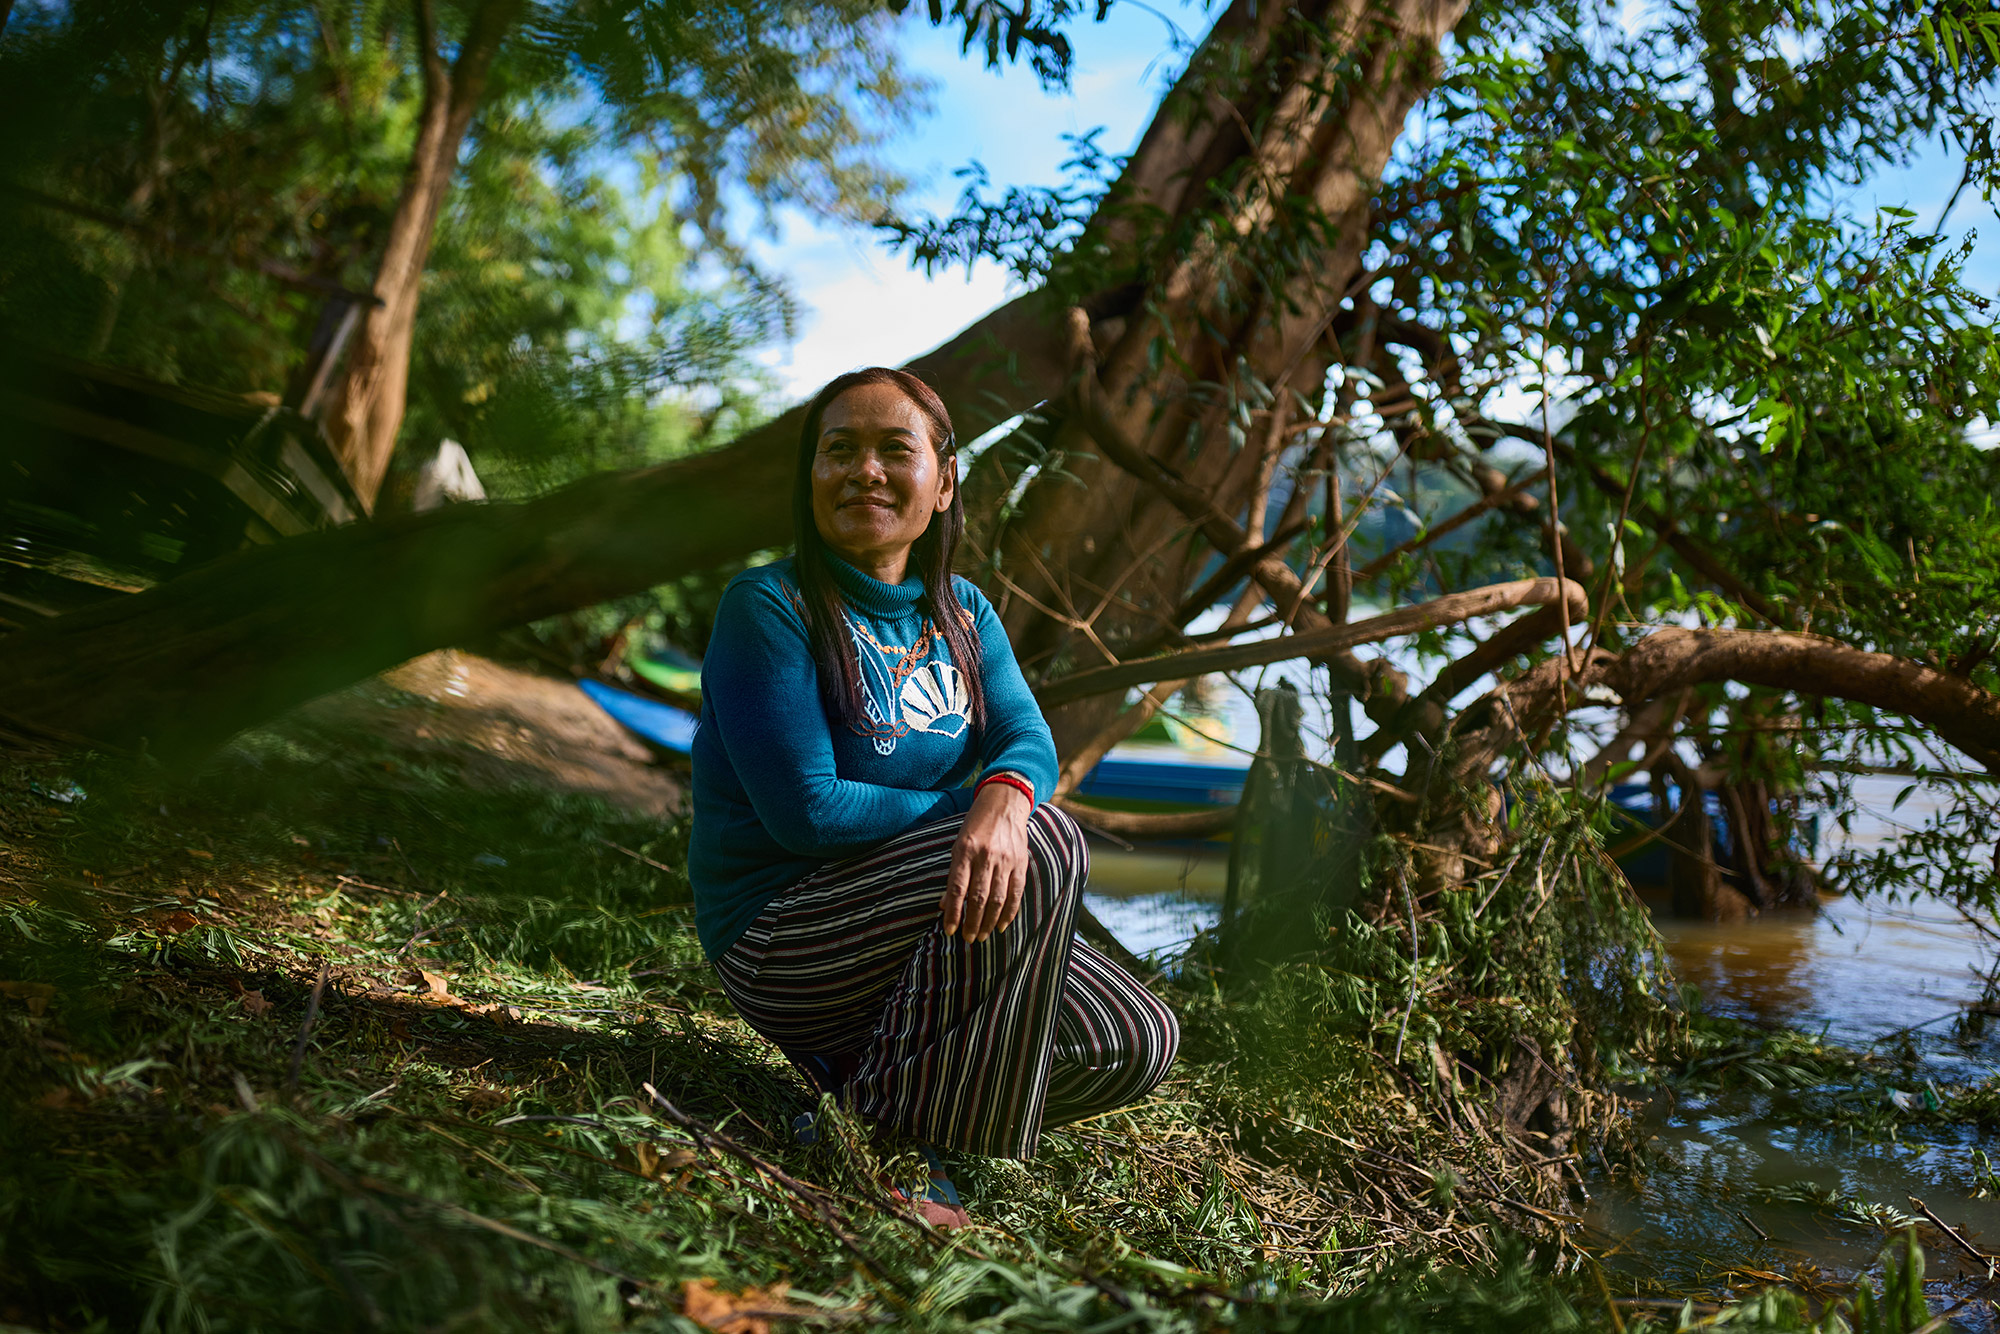 Cambodia: Siphon is a community activist who was trained and coached by 3SPN to advocate for community issues with the local authorities. She is a leader in her community and a part of the local fisheries network. Photo: Patrick Moran/Oxfam